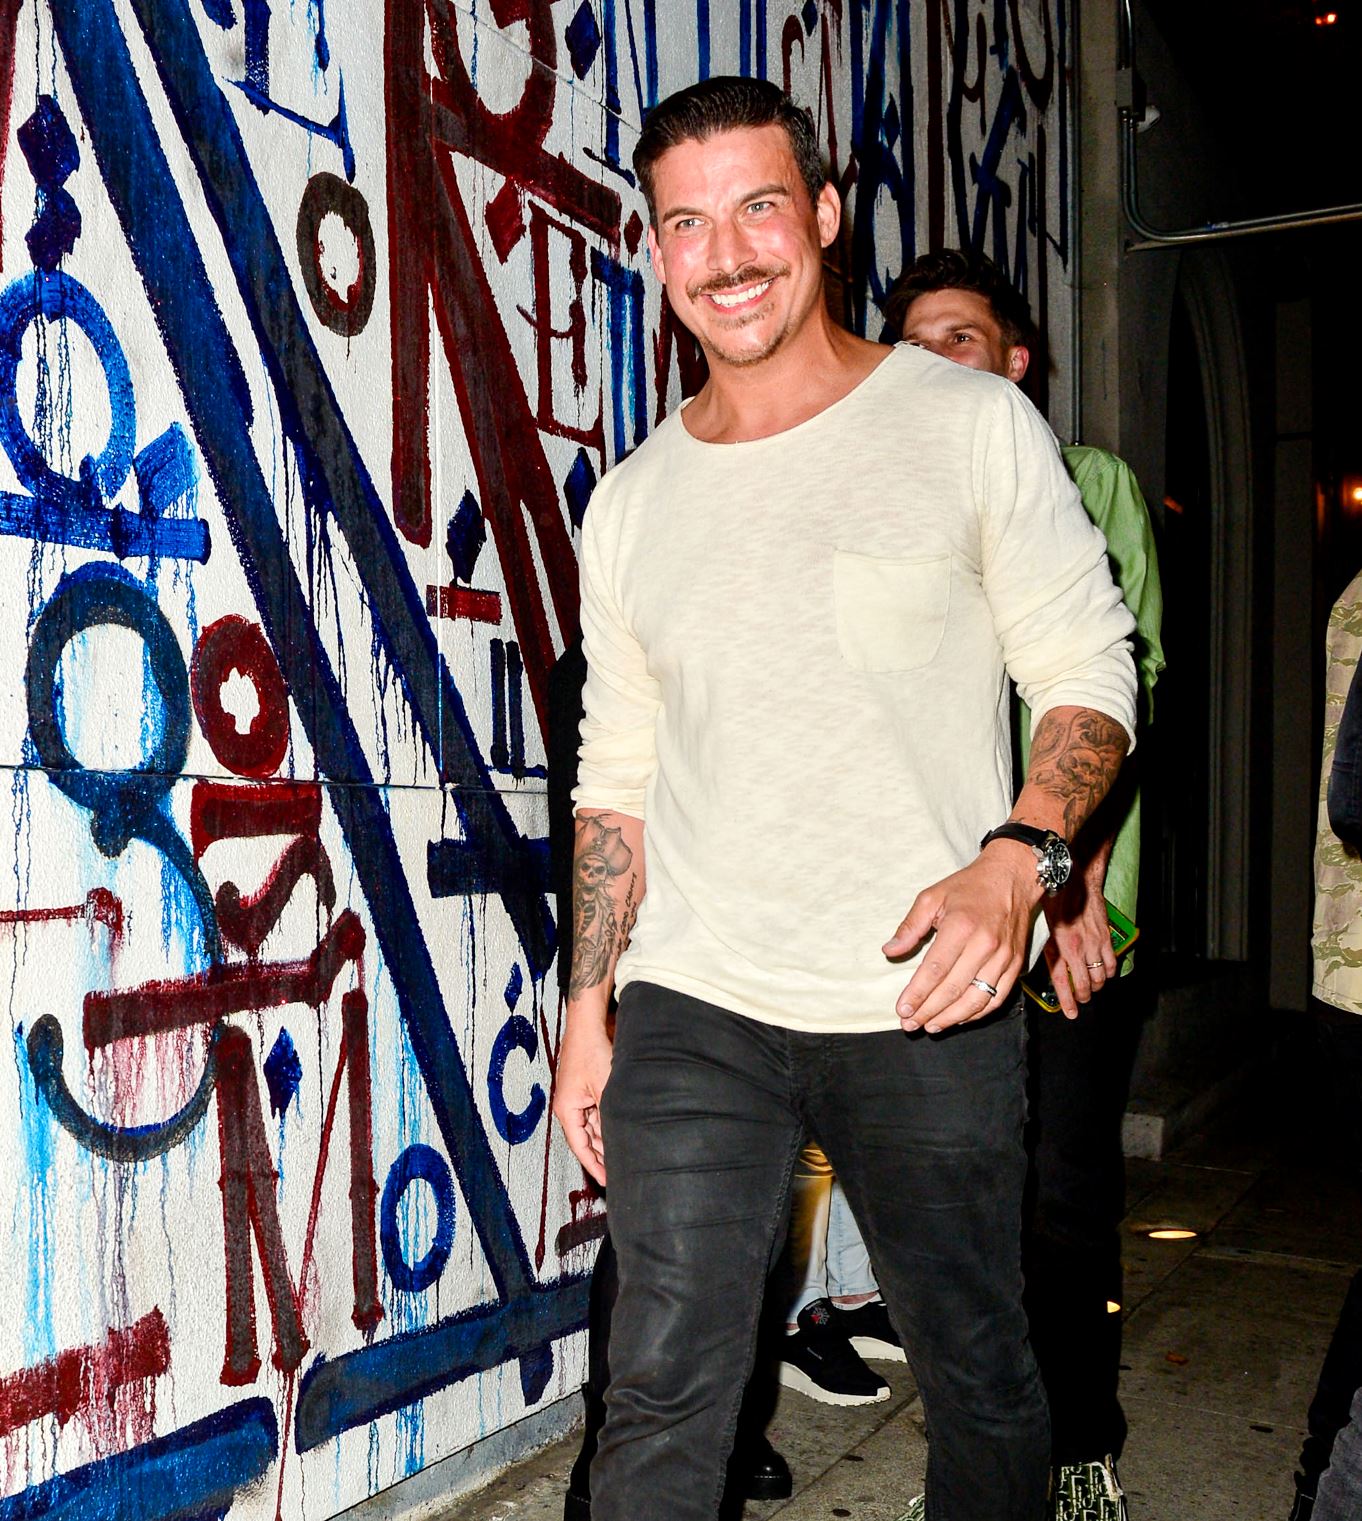 Vanderpump Rules' Jax Taylor Accused of Forcing Plane to Turn Around and Throwing a Fit Over First Class Seat, See What His Rep is Saying